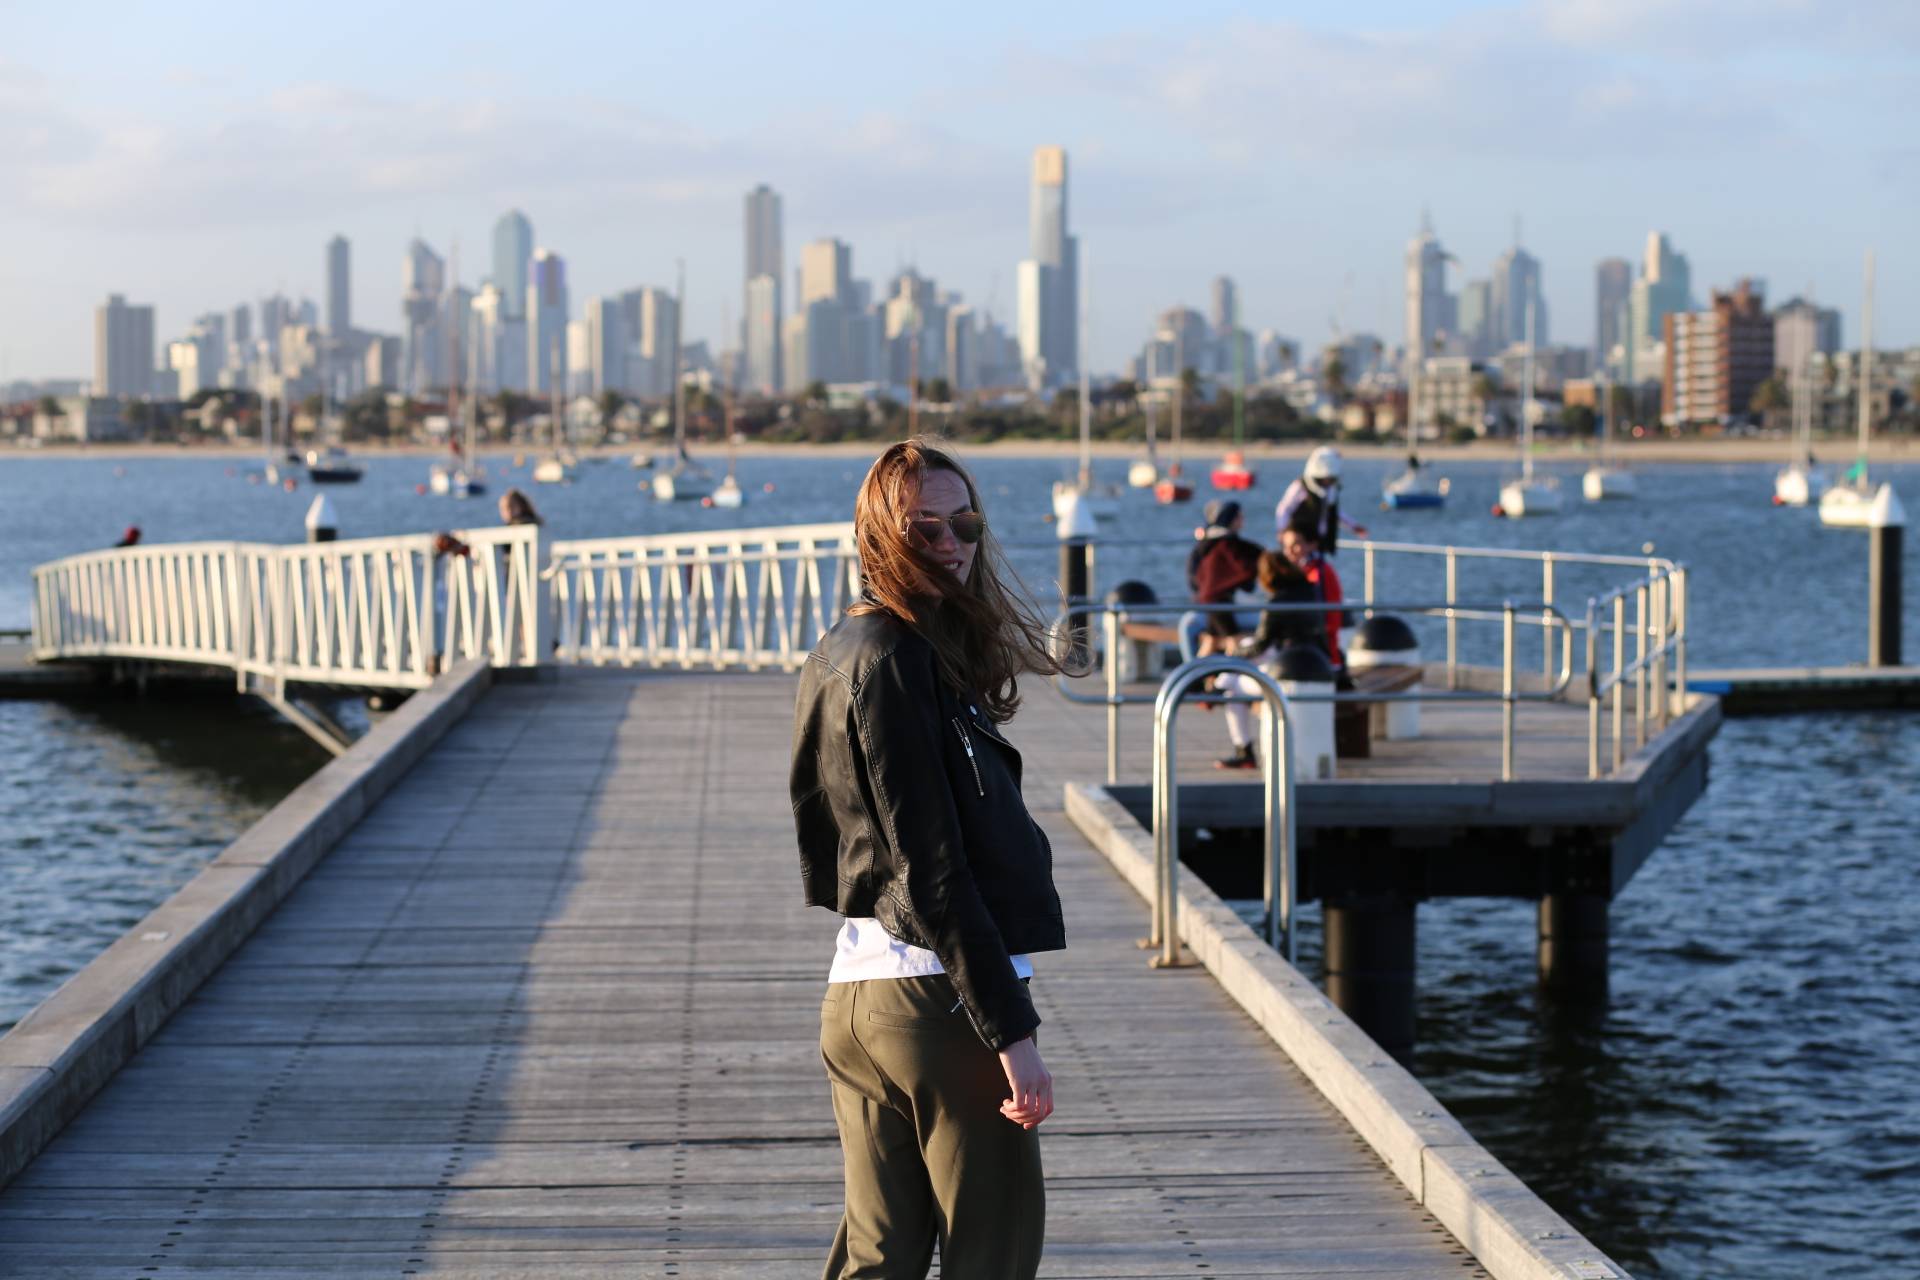 Great view along the St Kilda Pier